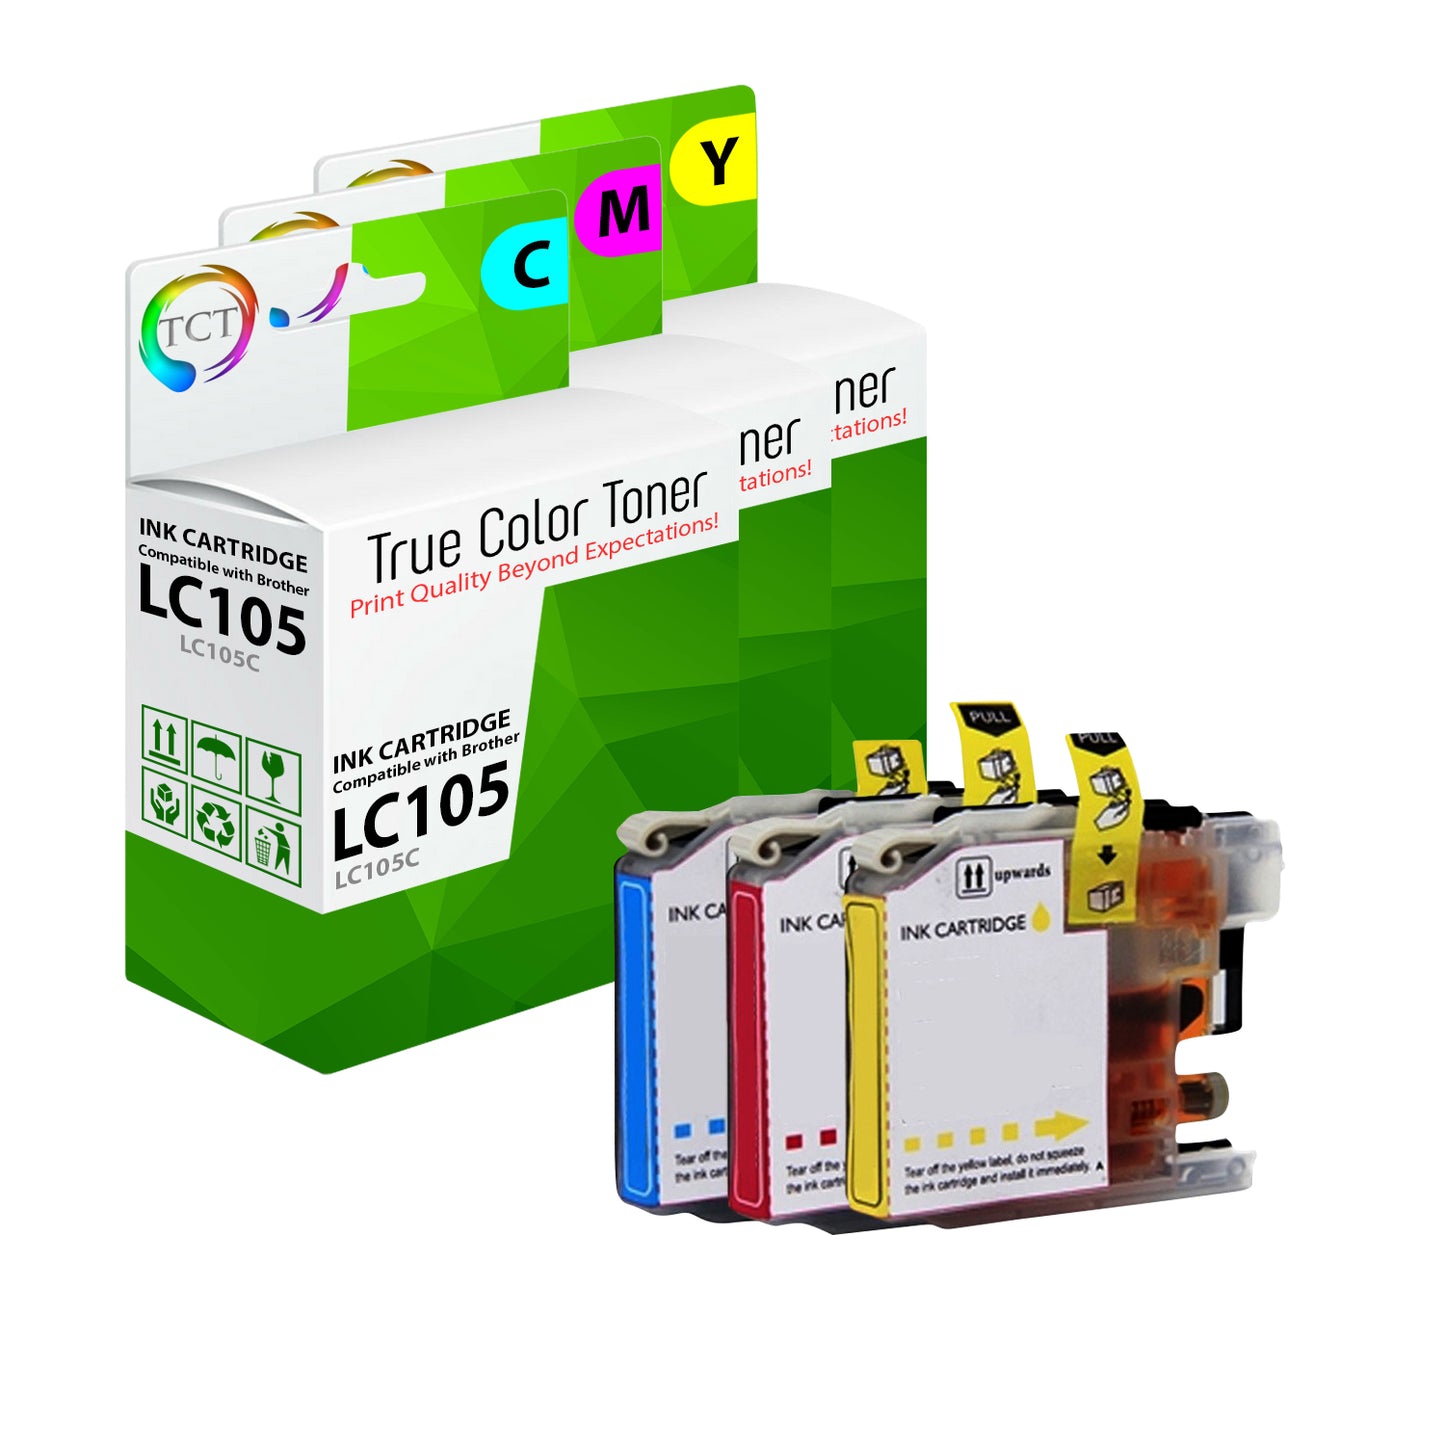 TCT Compatible Ink Cartridge Replacement for the Brother LC105 Series - 3 Pack (C, M, Y)